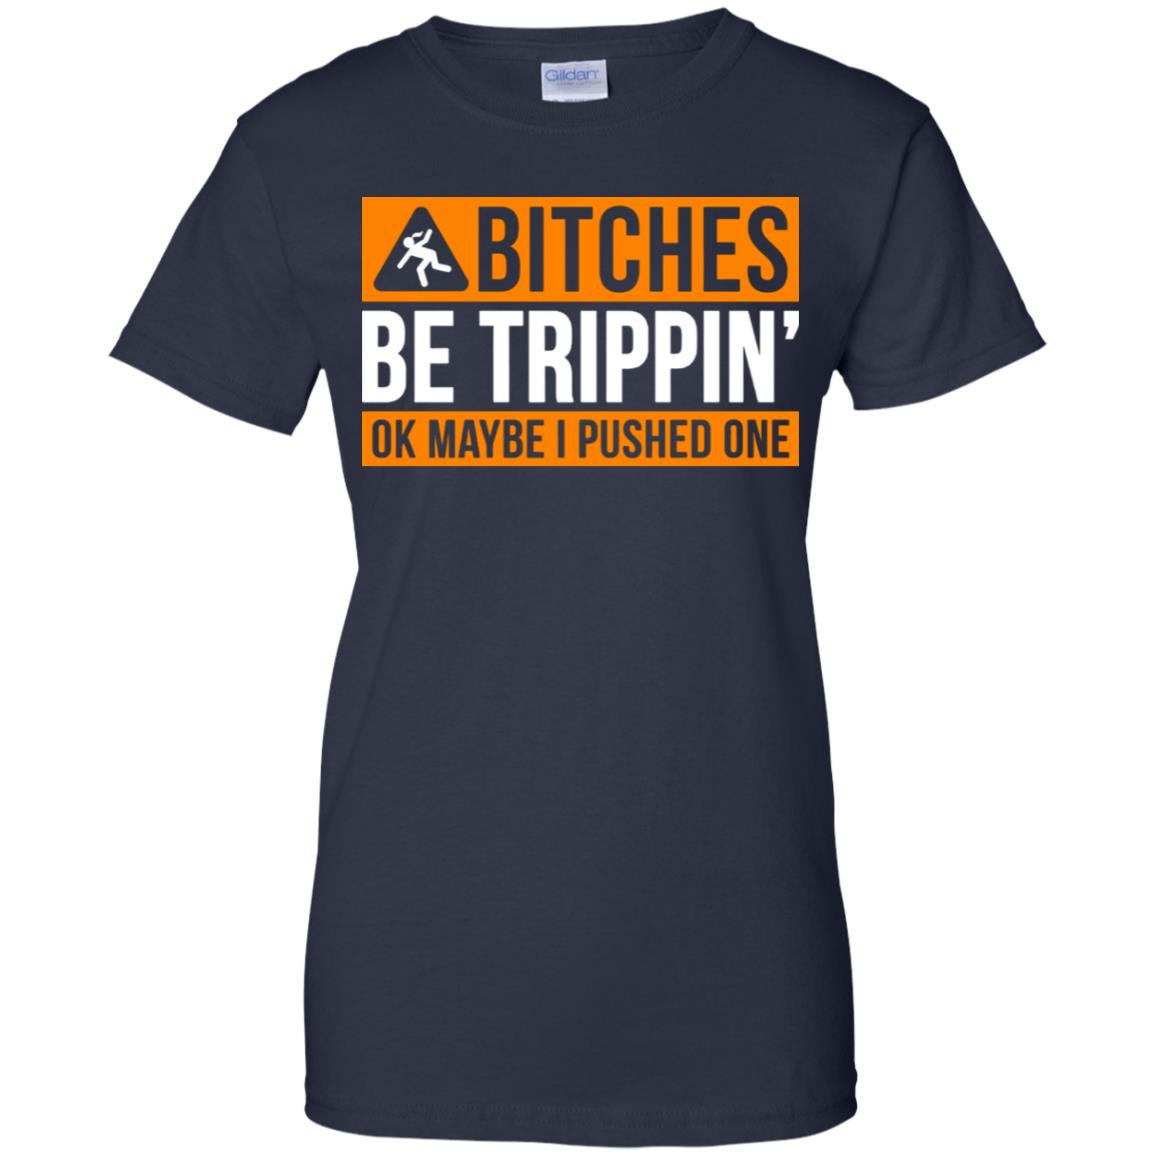 Bitches Be Trippin' Okay Maybe I Pushed One T-shirt Funny Attitude Hipster Sarcastic Tee Shirt